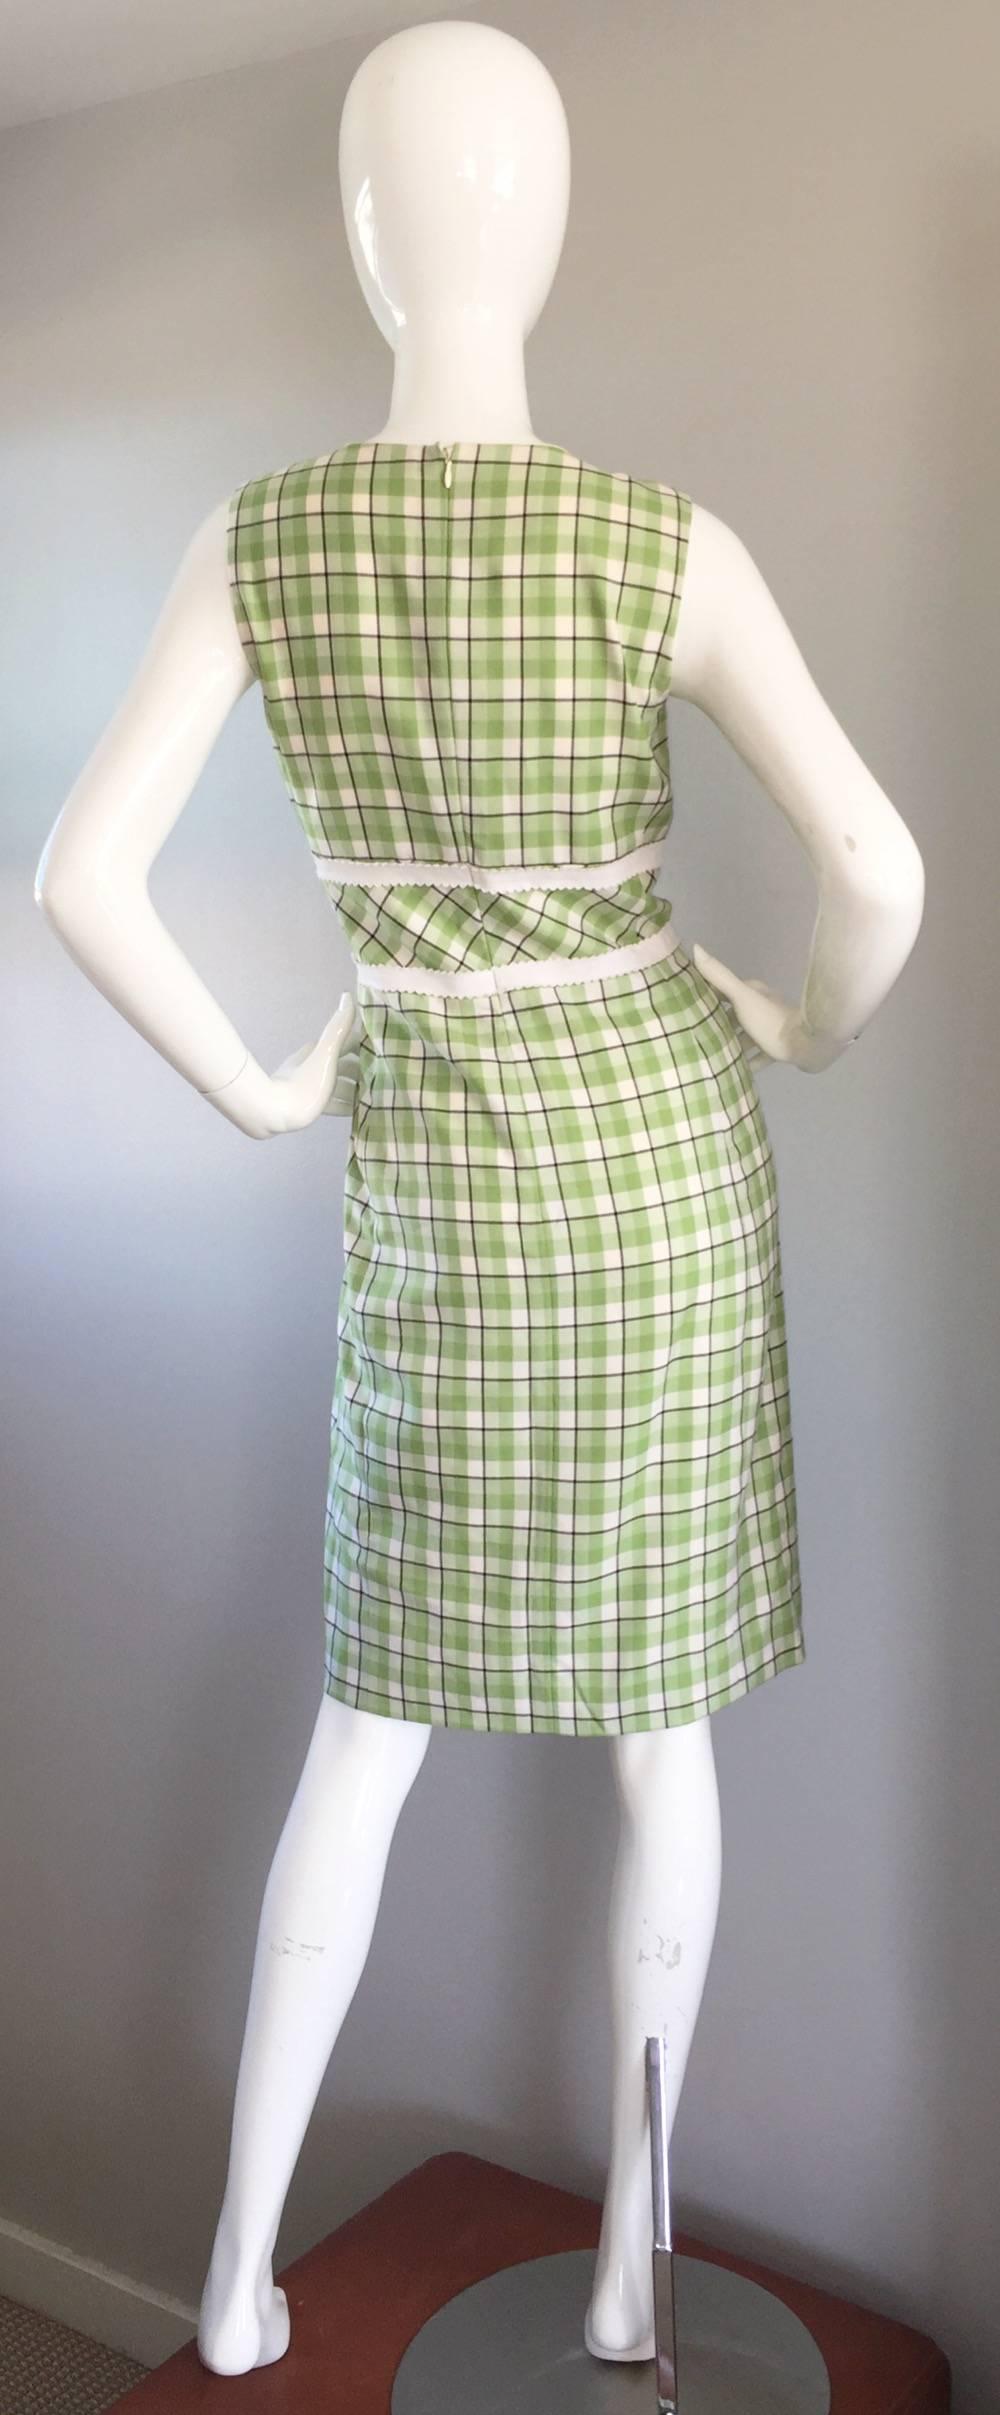 Oscar de La Renta Size 6 / 8 Saks 5th Ave Green + White Checkered Plaid Dress  In Excellent Condition For Sale In San Diego, CA